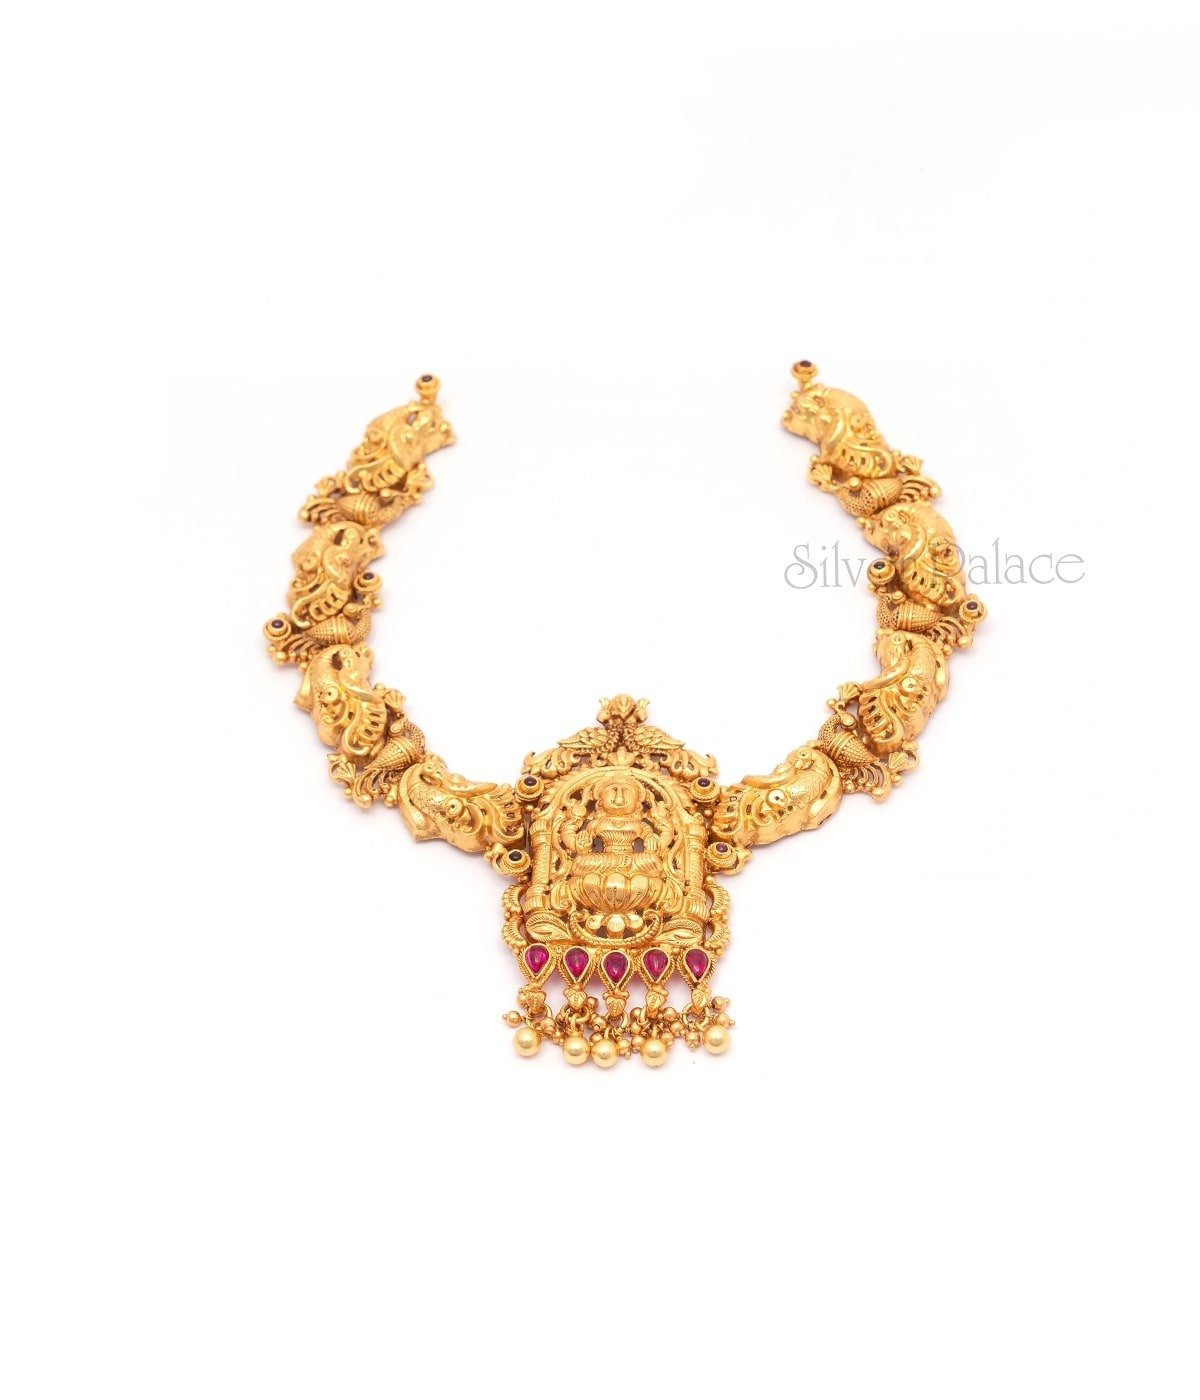 GOLD PLATED TRADITIONAL LAKSHMI NECKLACE GOLDEN BEADS